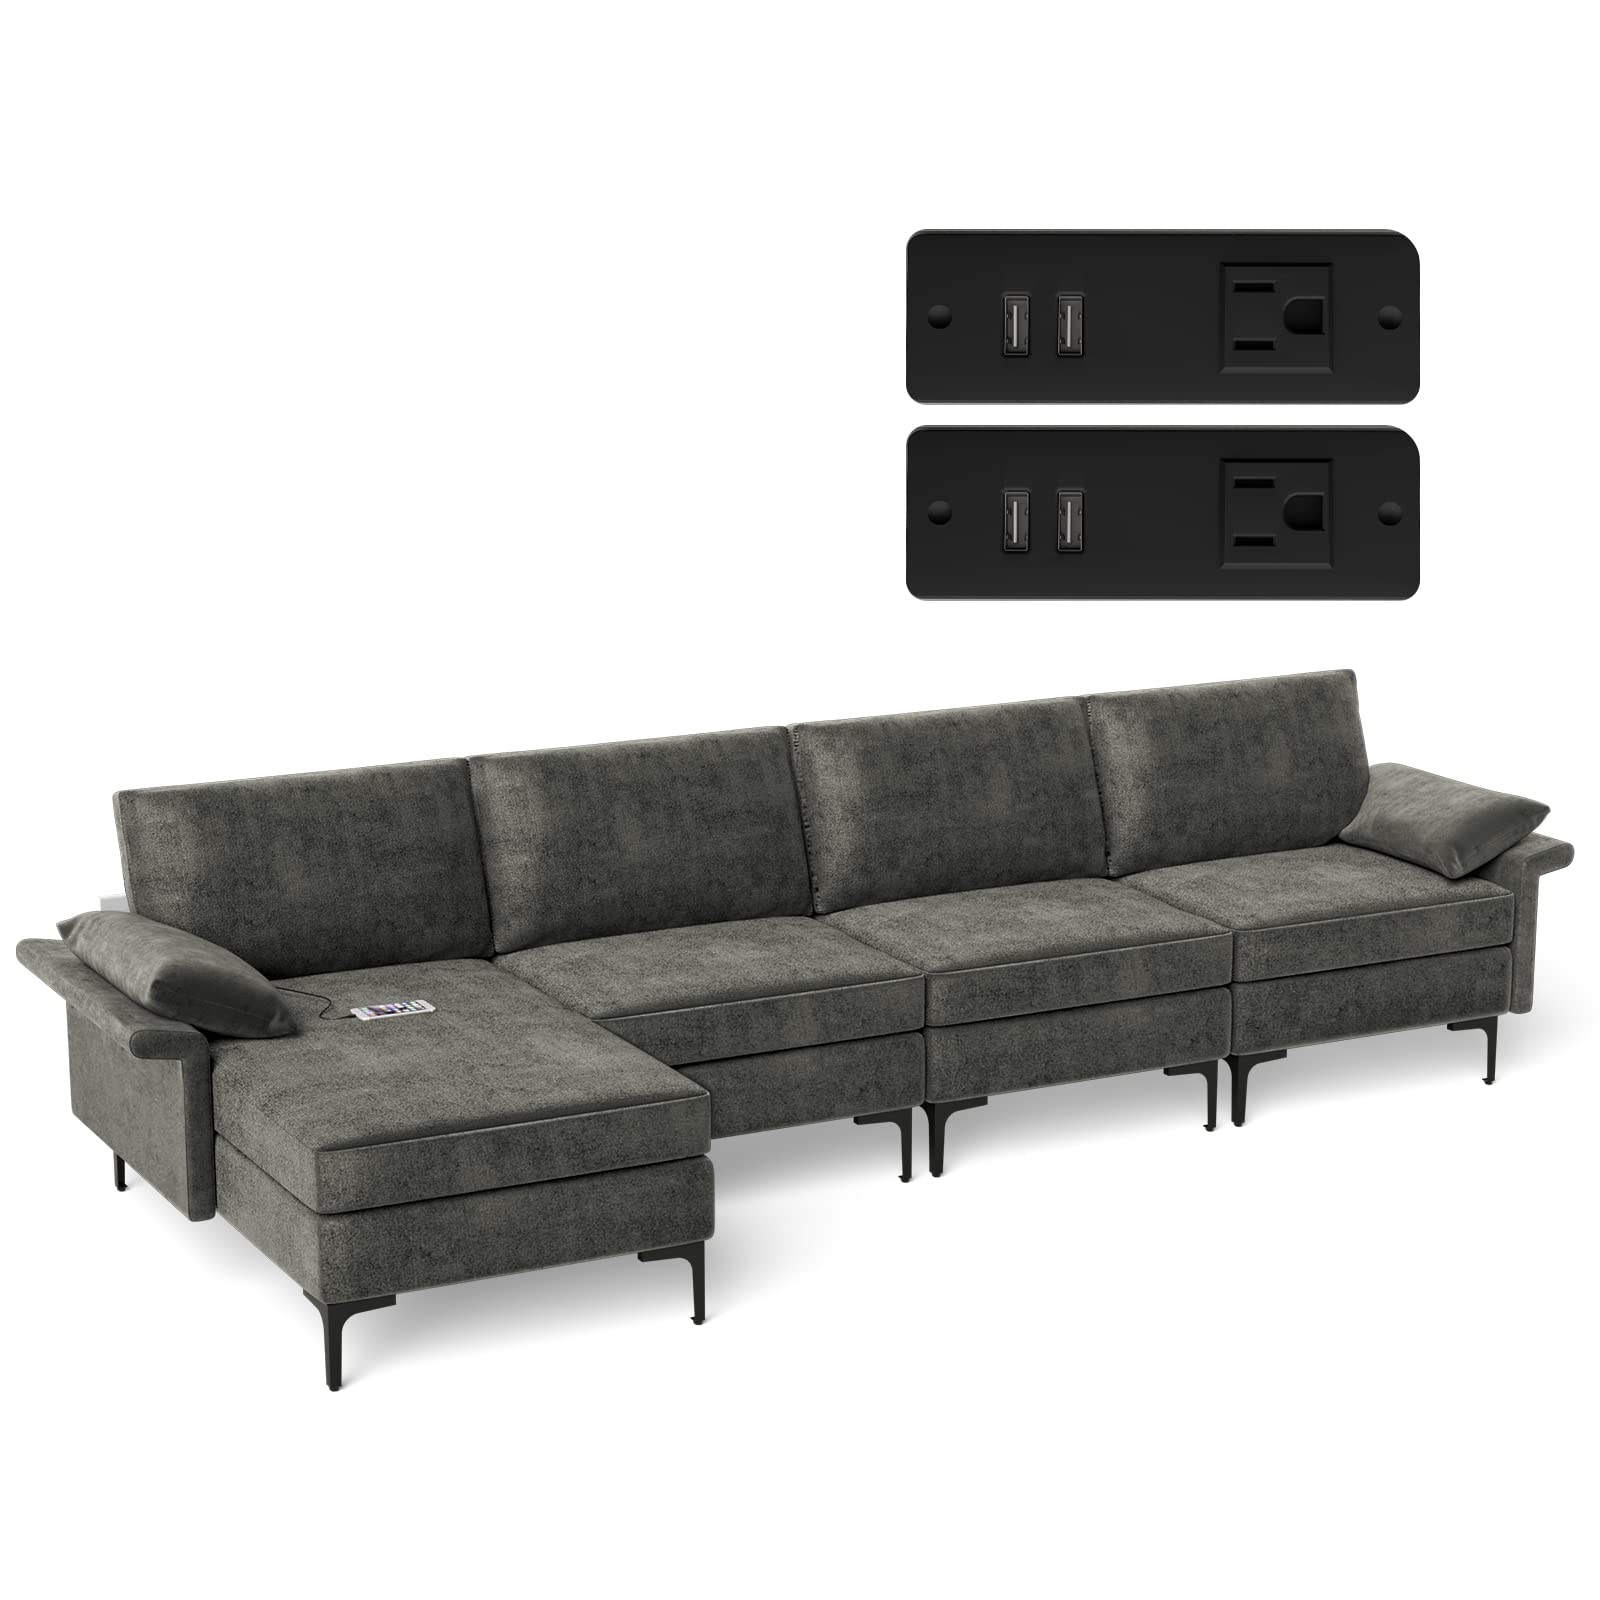 Giantex 130.5" L Convertible Sofa Couch, Sectional Sleeper